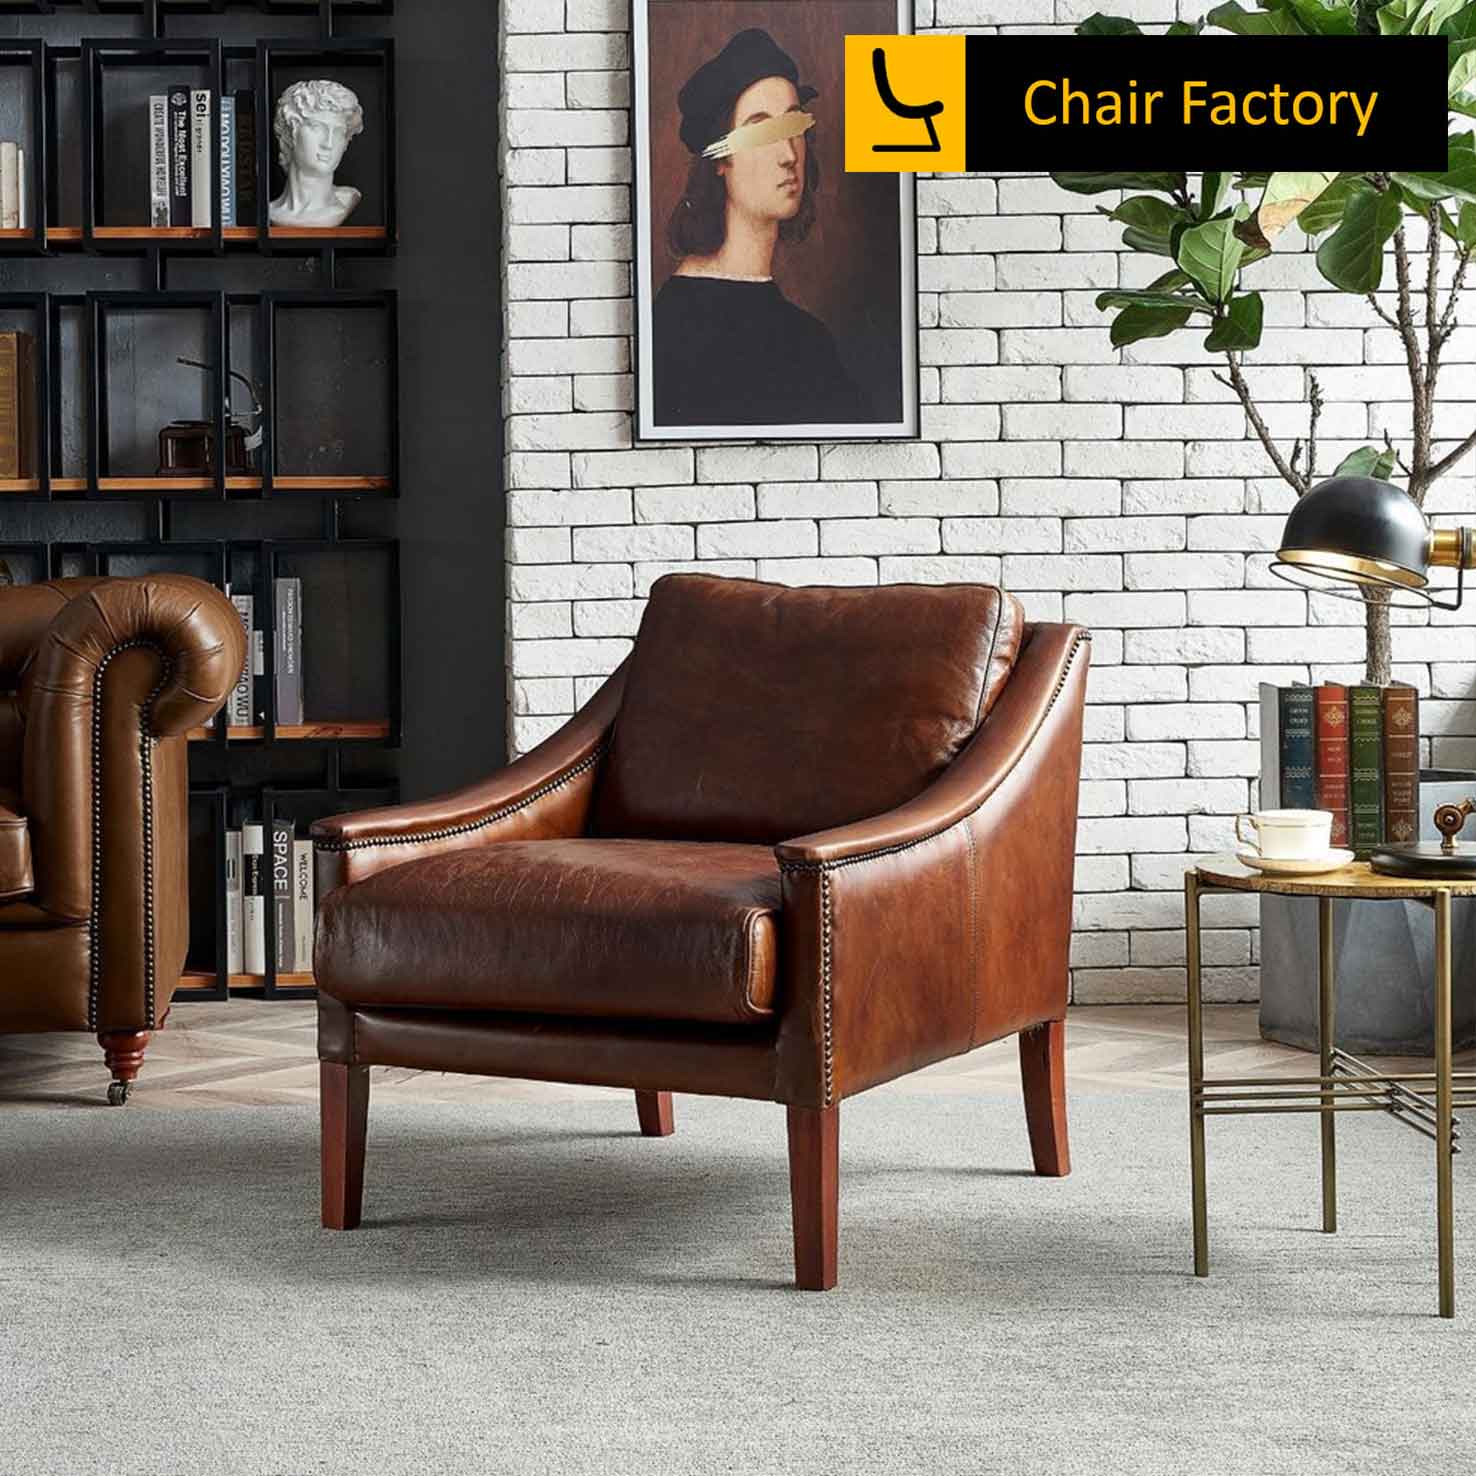 Foxton Genuine Leather Arm Chairs